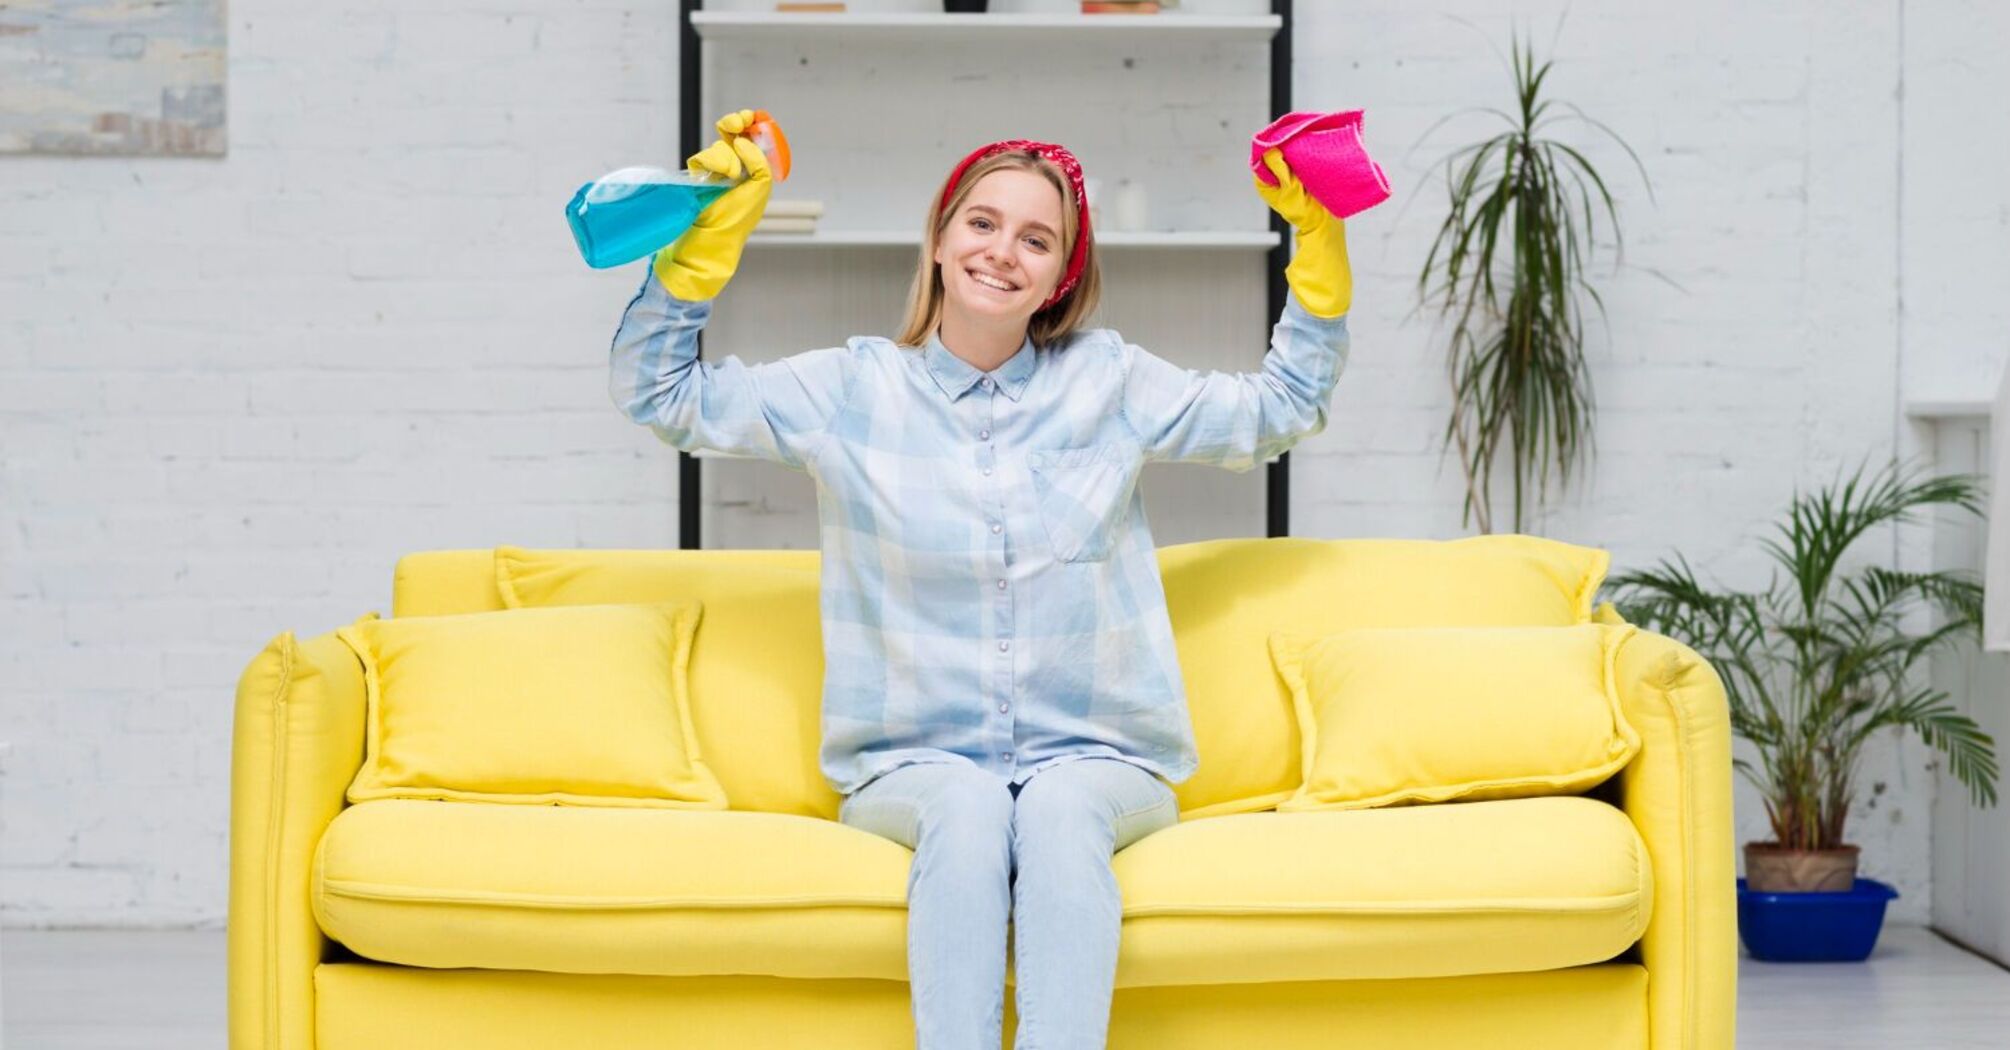 How to enjoy a clean home after a vacation: a working life hack that works for everyone